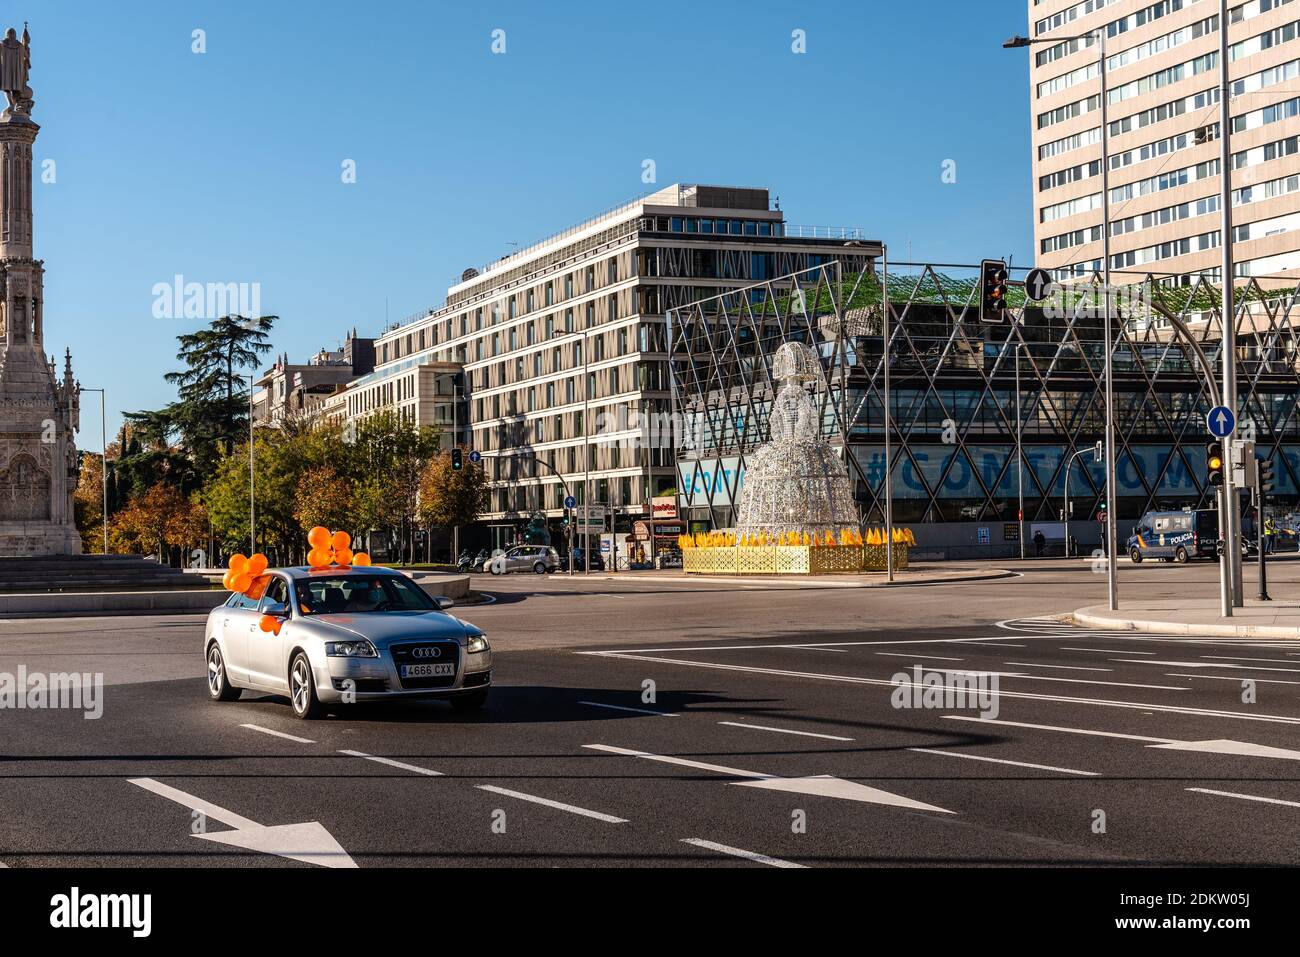 Madrid, Spain - November 22, 2020: Car carrying orange balloons in Plaza de Colon in Madrid during demonstration against Celaa Education Law Stock Photo